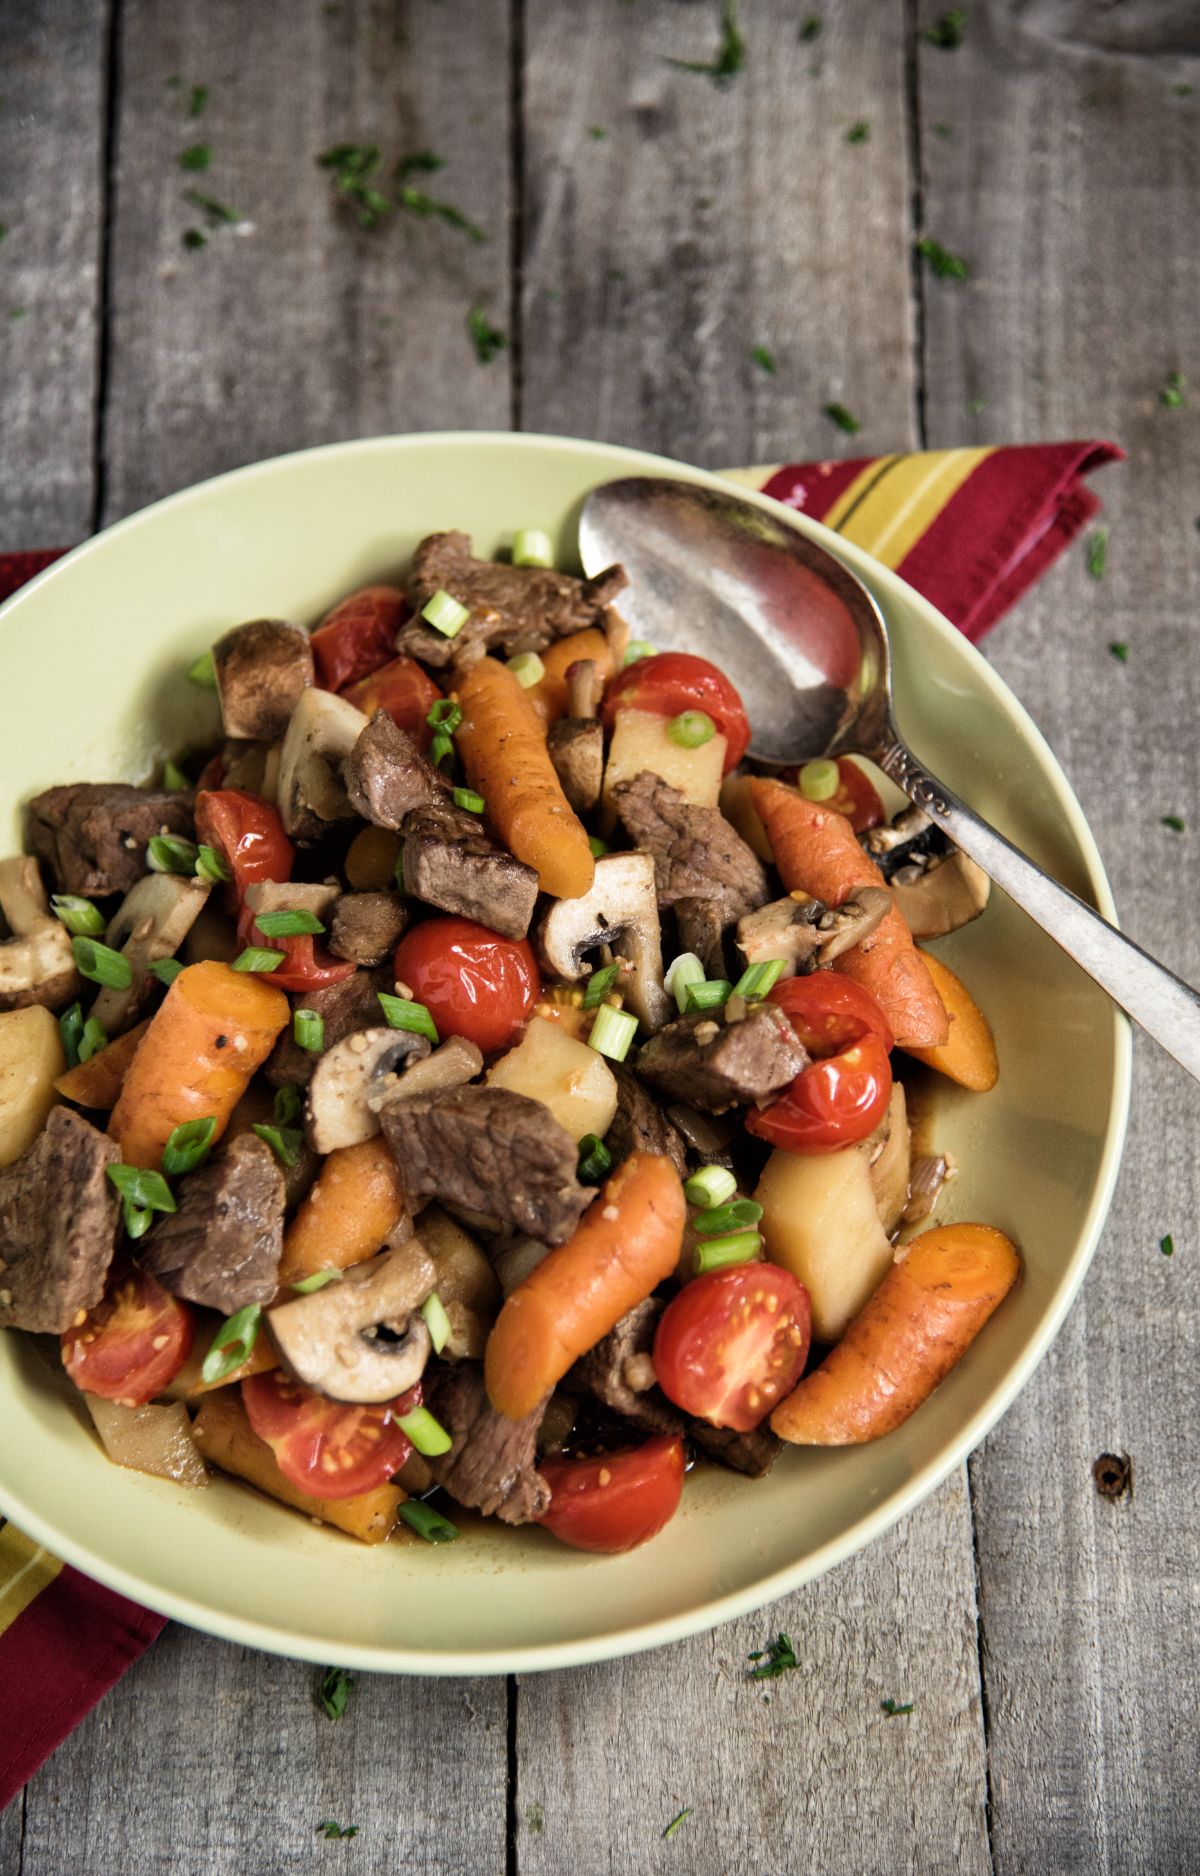 Beef and Vegetable Skillet on a plate with a spoon.